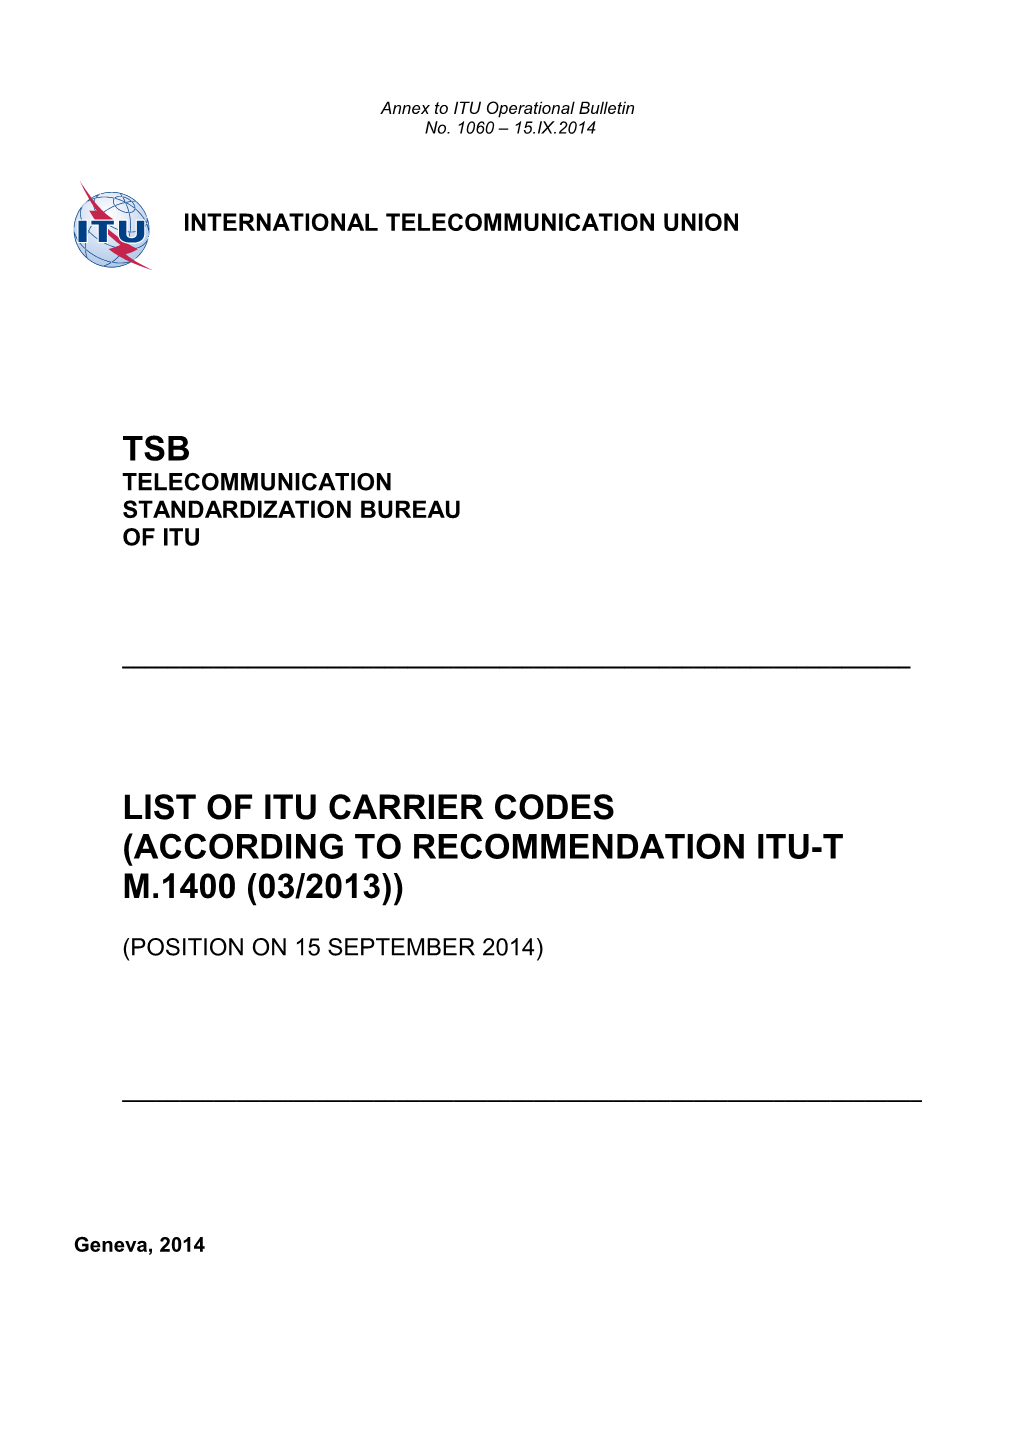 List of ITU Carrier Codes (According to Recommendation ITU-T M.1400 (03/2013))